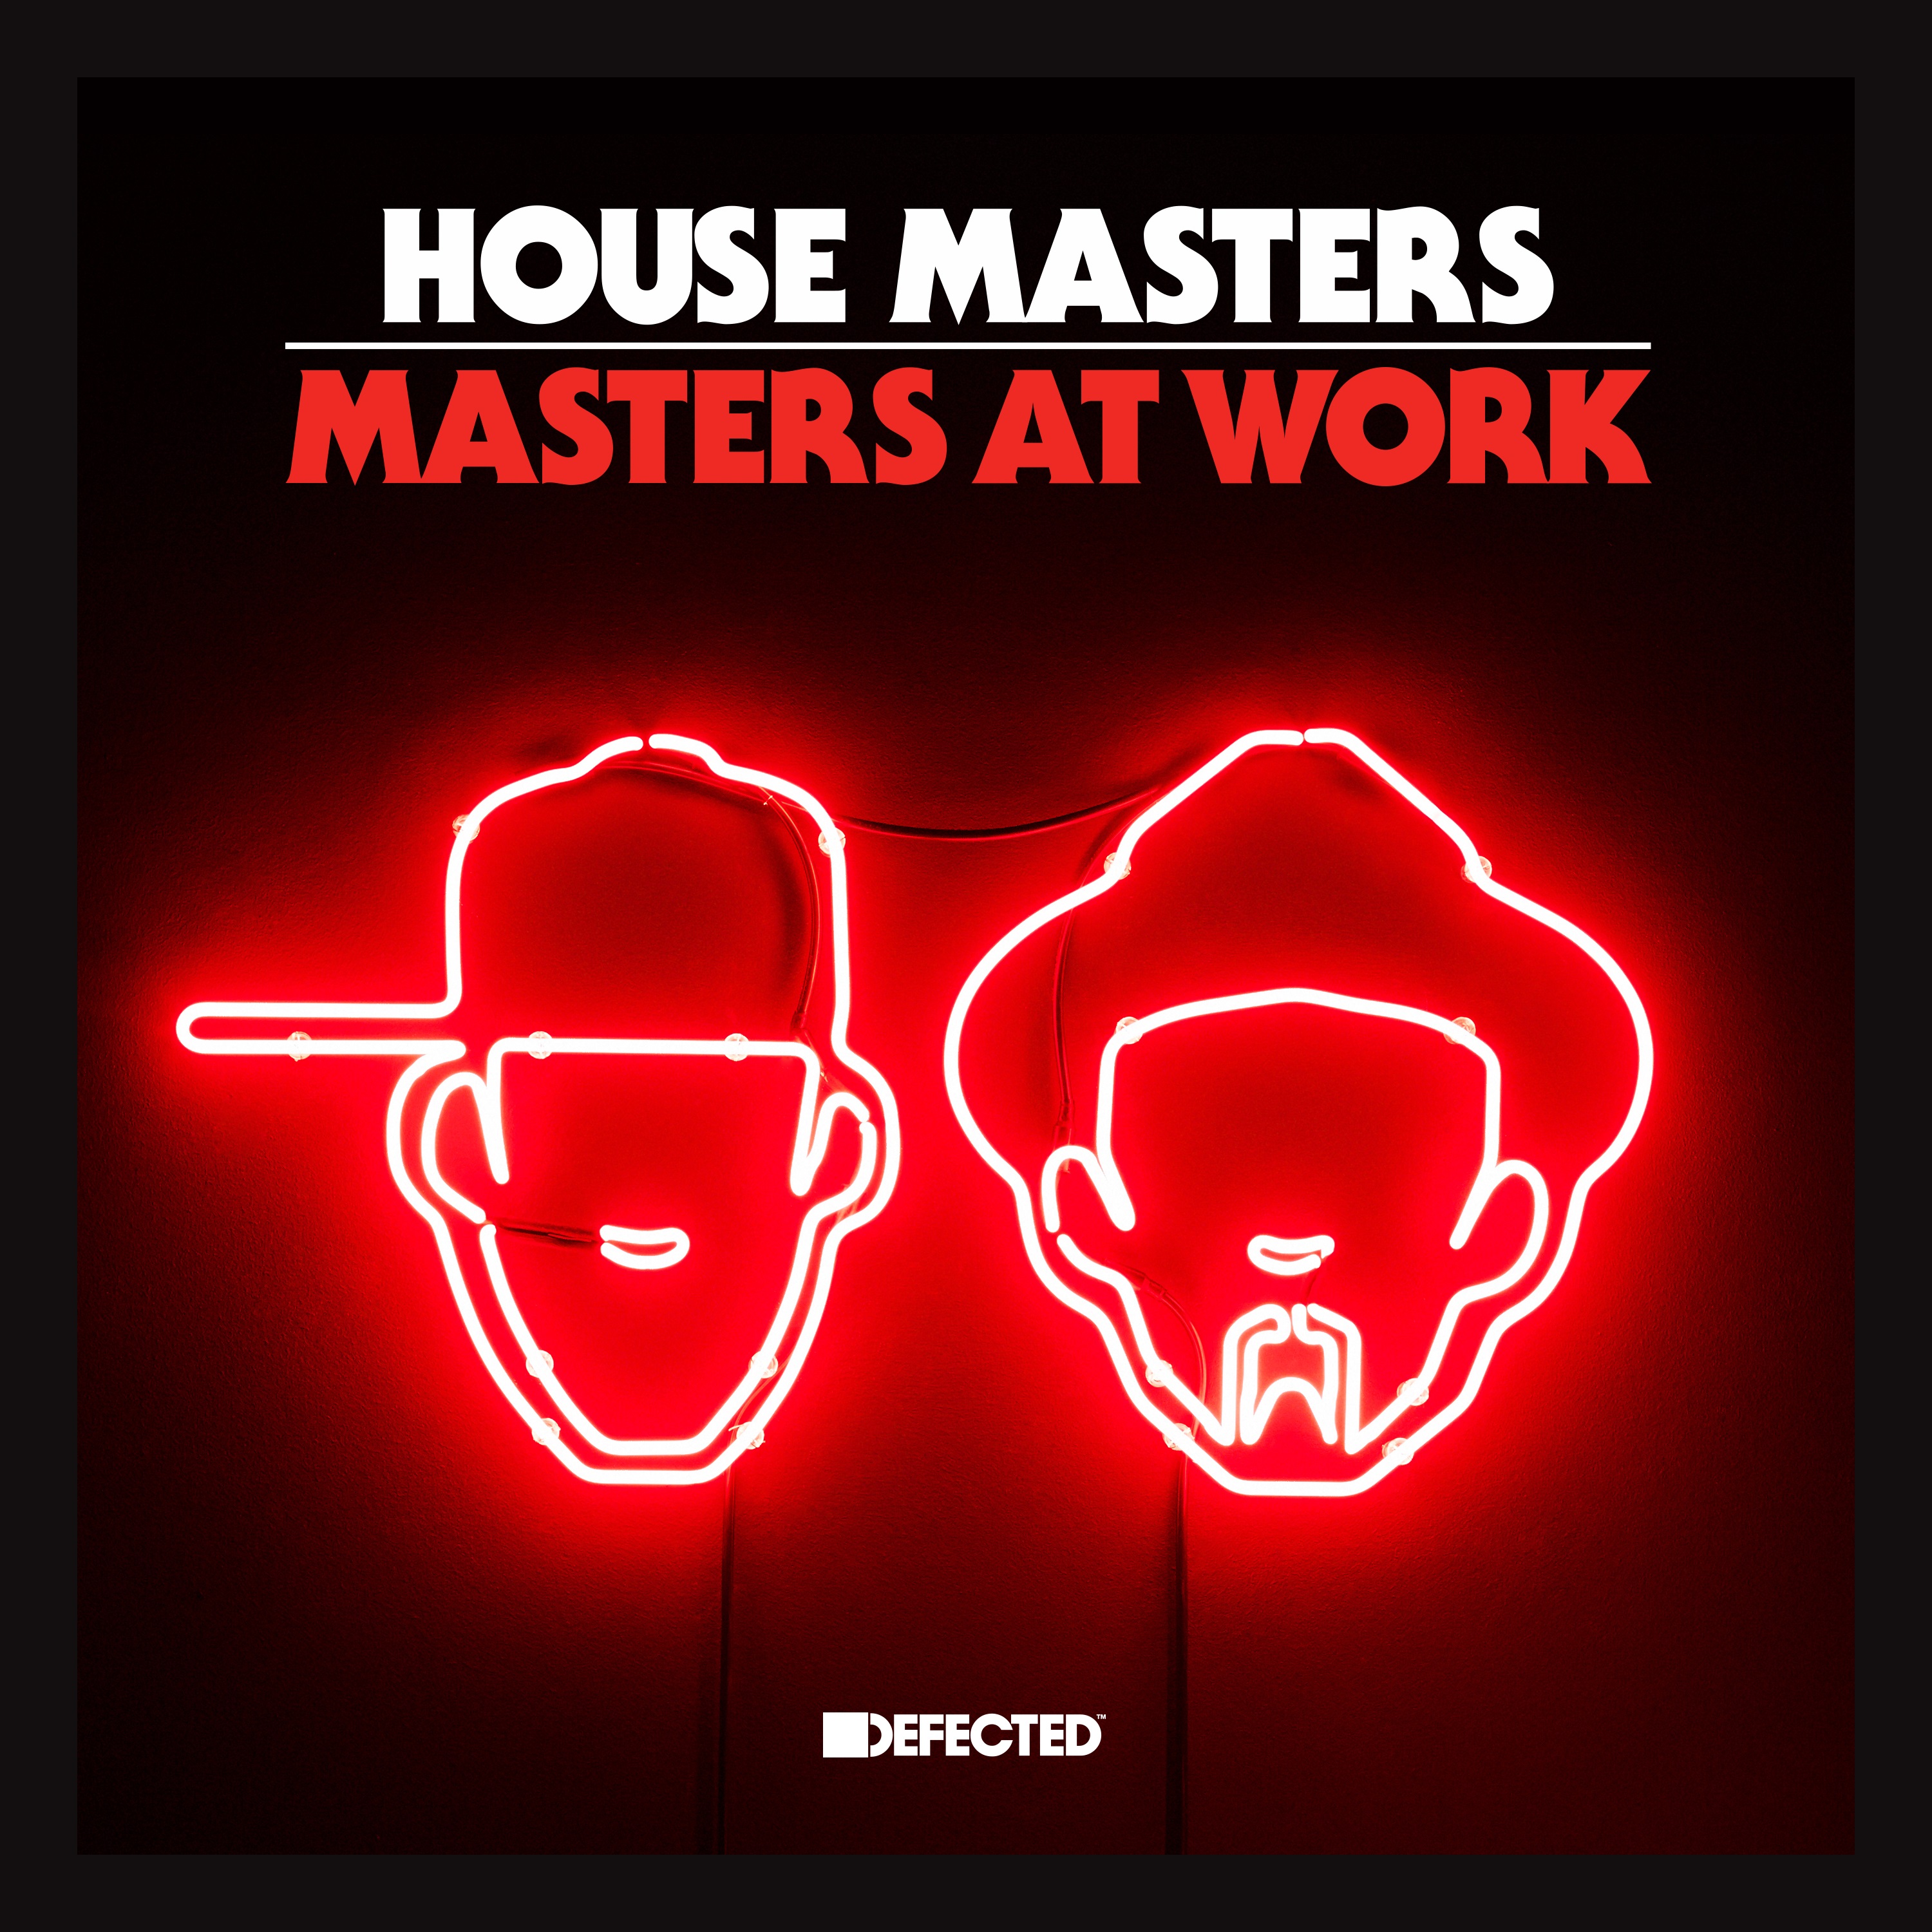 MASTERS AT WORK 『HOUSE MASTERS』 DEFECTEDメルおじDEFECTED